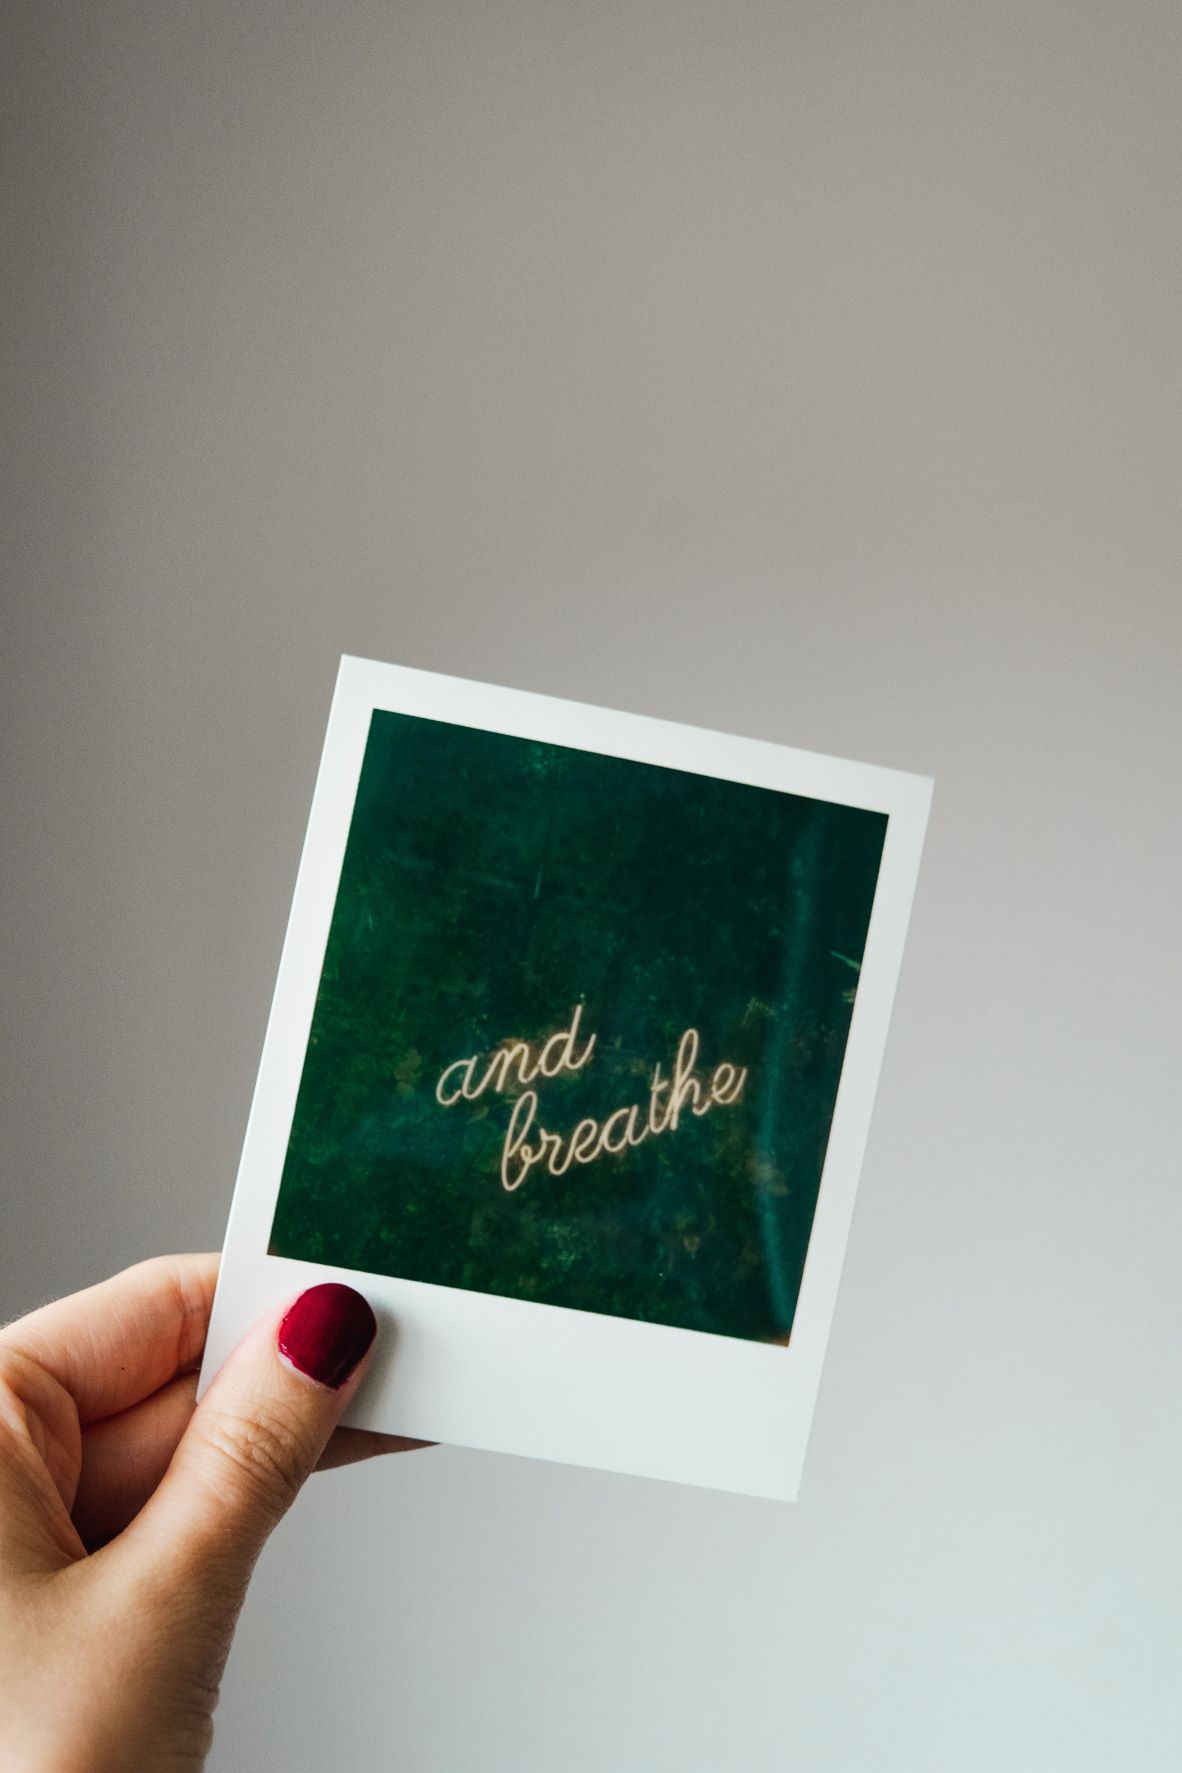 Polaroid photo with a green background and the words "and breathe" on it. If you are feeling overwhelmed with anxiety, an online therapist for anxiety in north carolina can help. Learn more here.